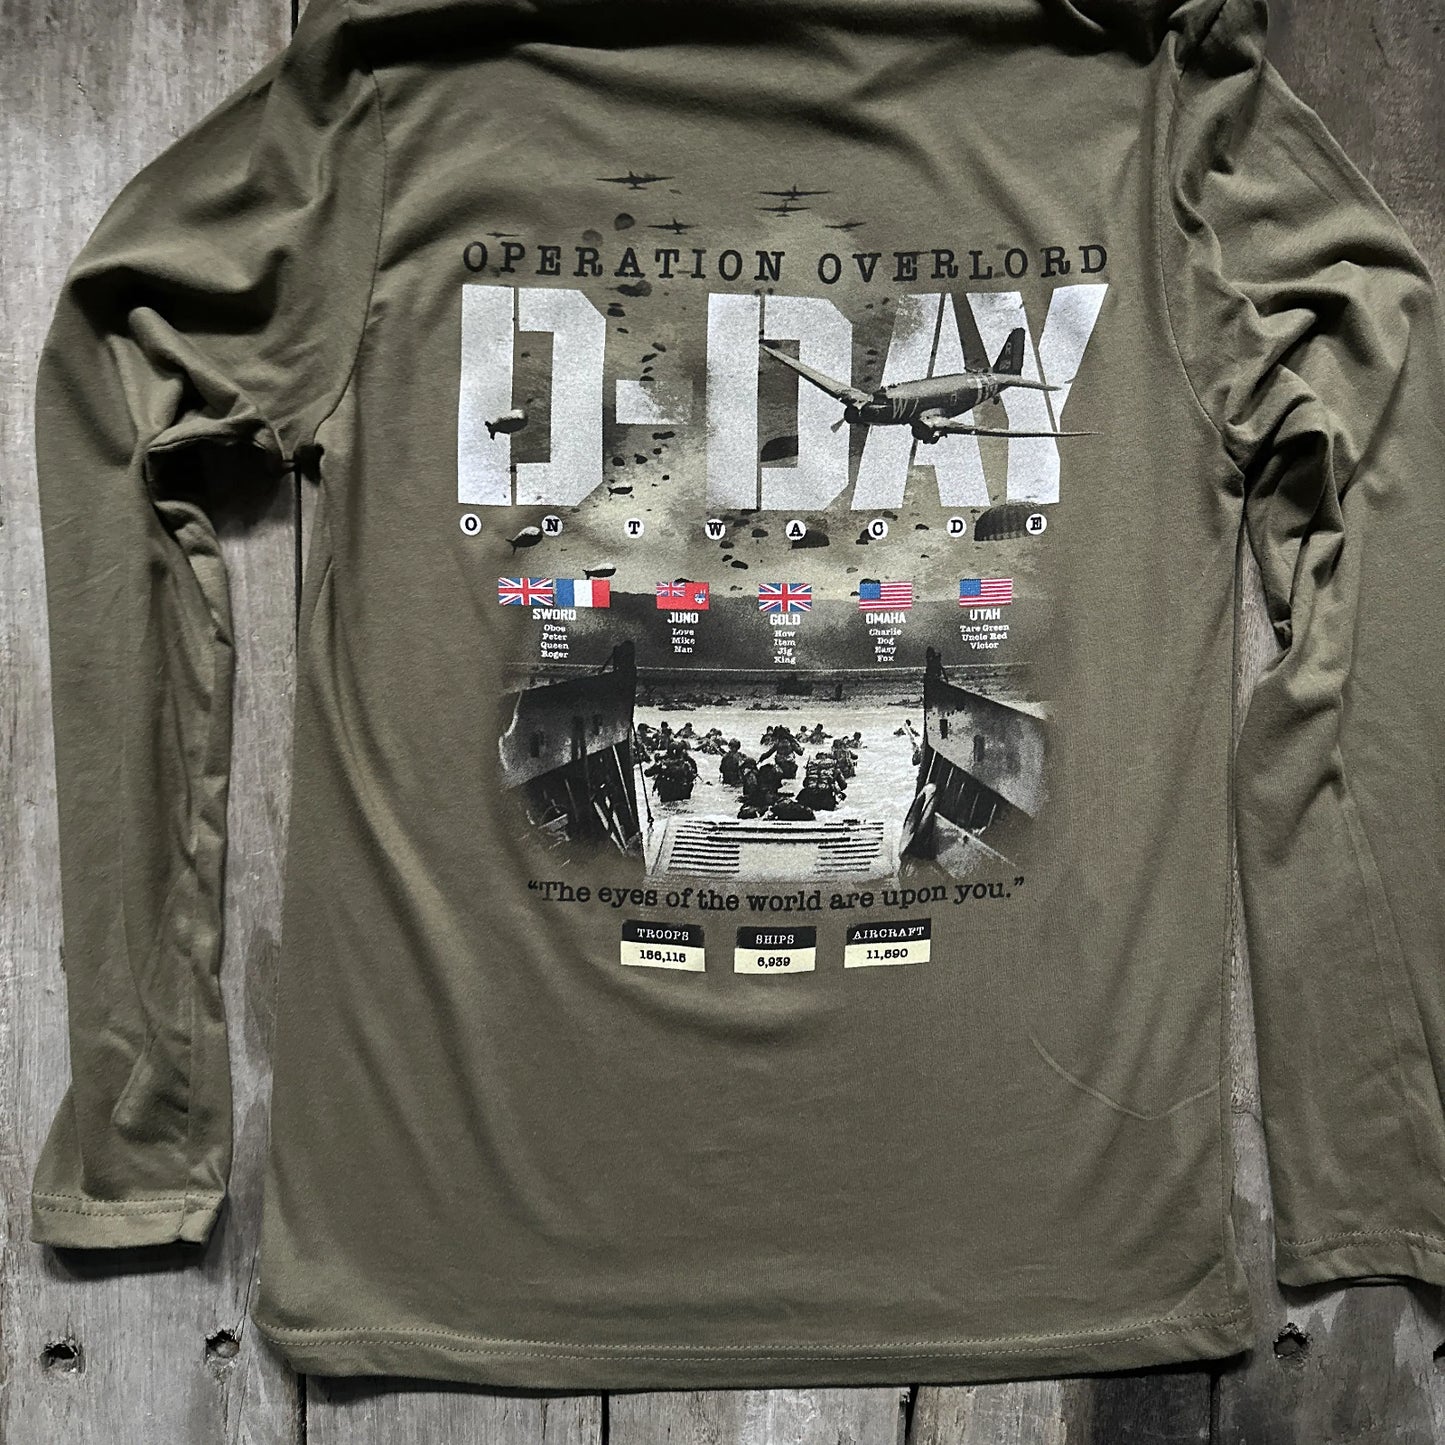 Back of D-Day Operation Overlord Long-sleeved shirt from The History List store